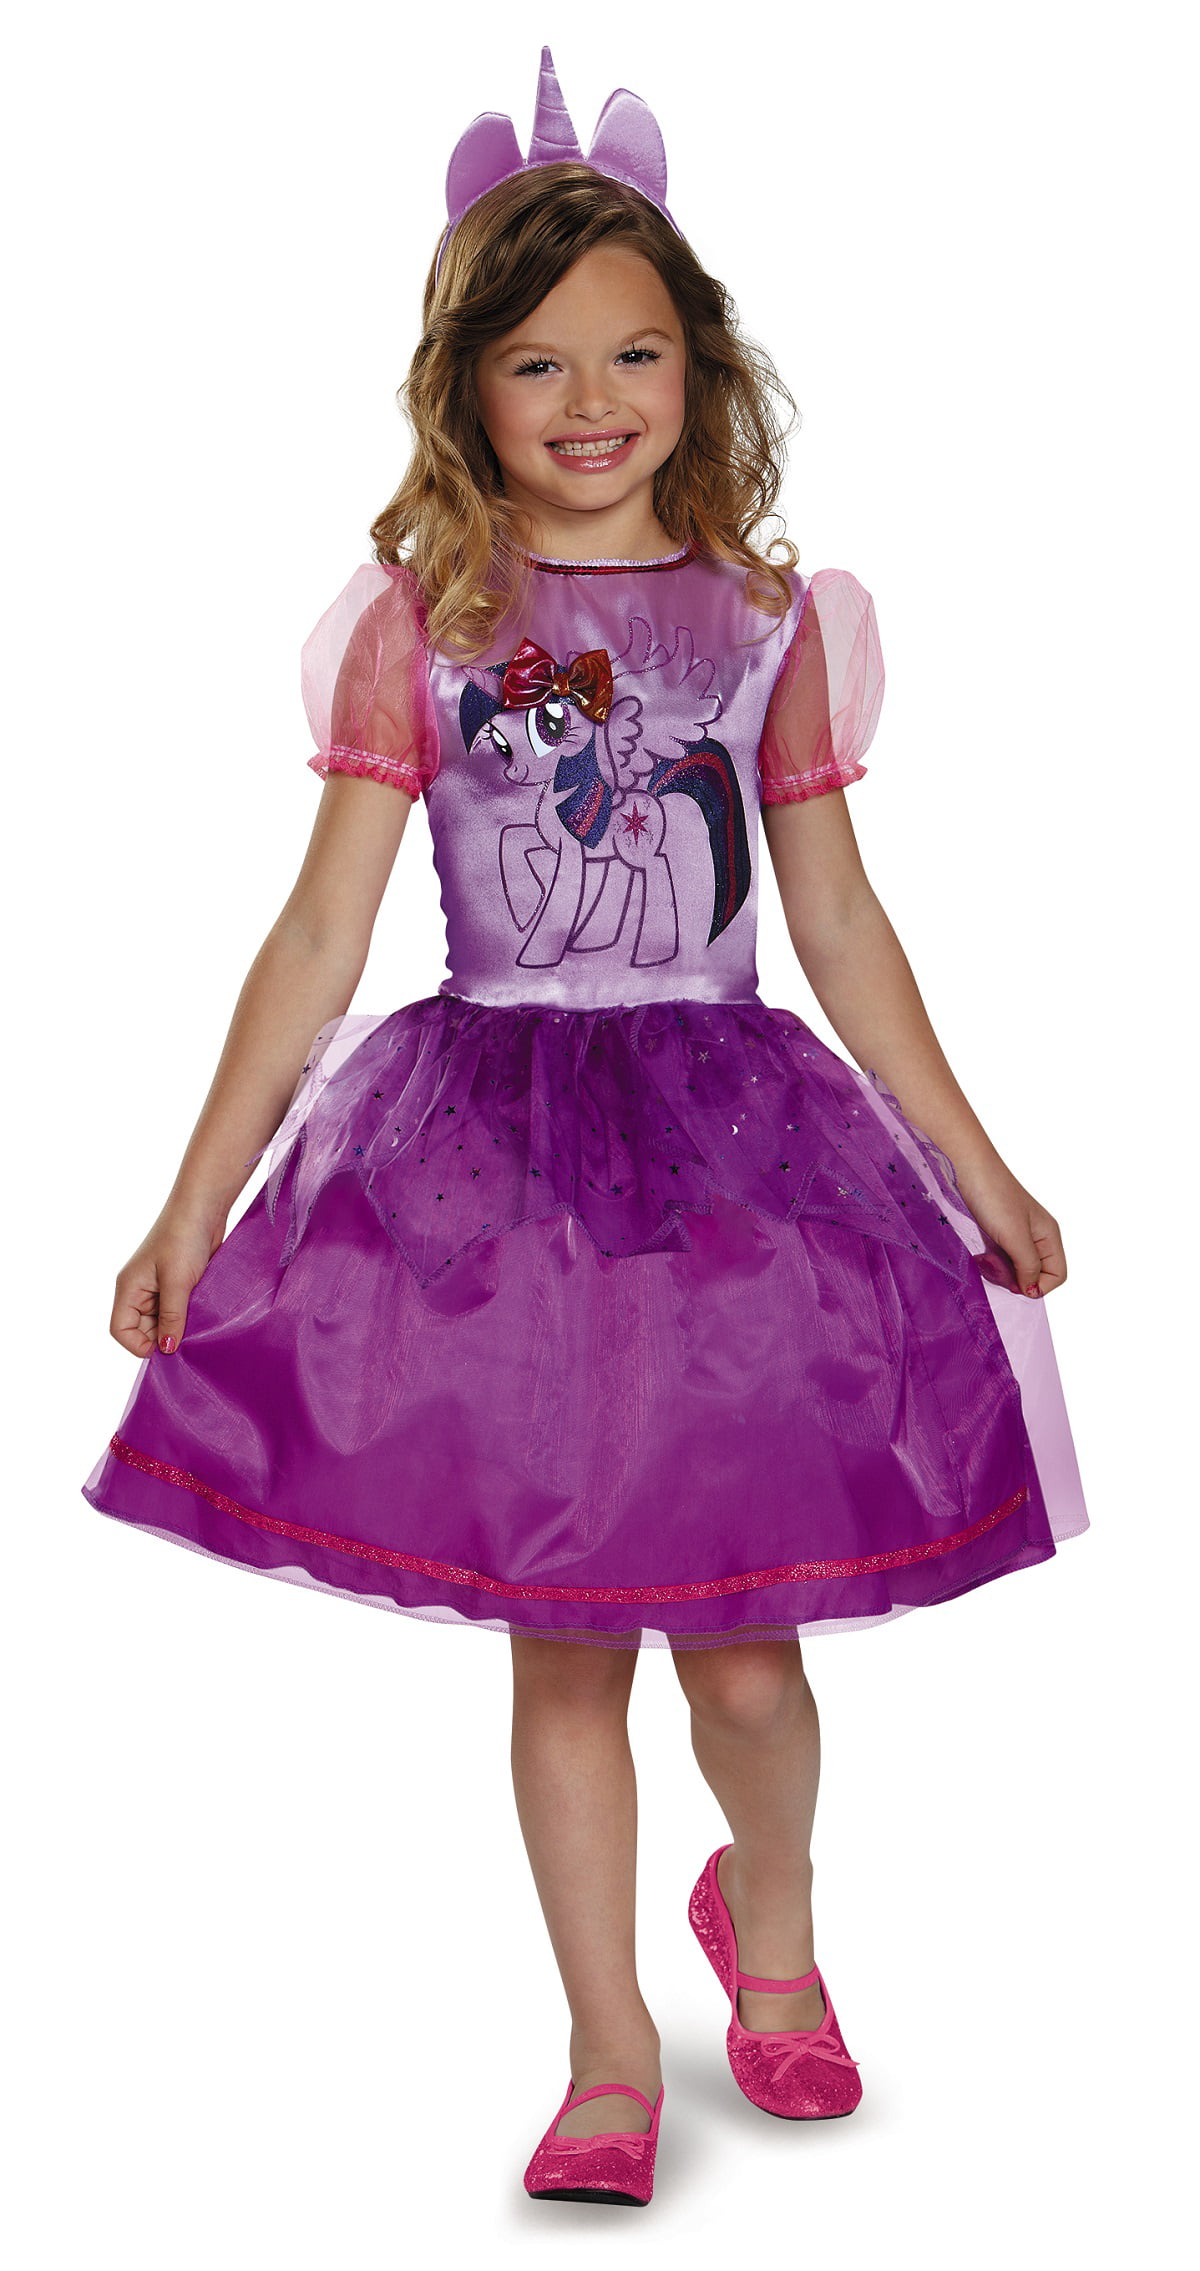 My Little Pony Twilight Sparkle Deluxe Fancy Dress Childs Kids Costume Outfit 